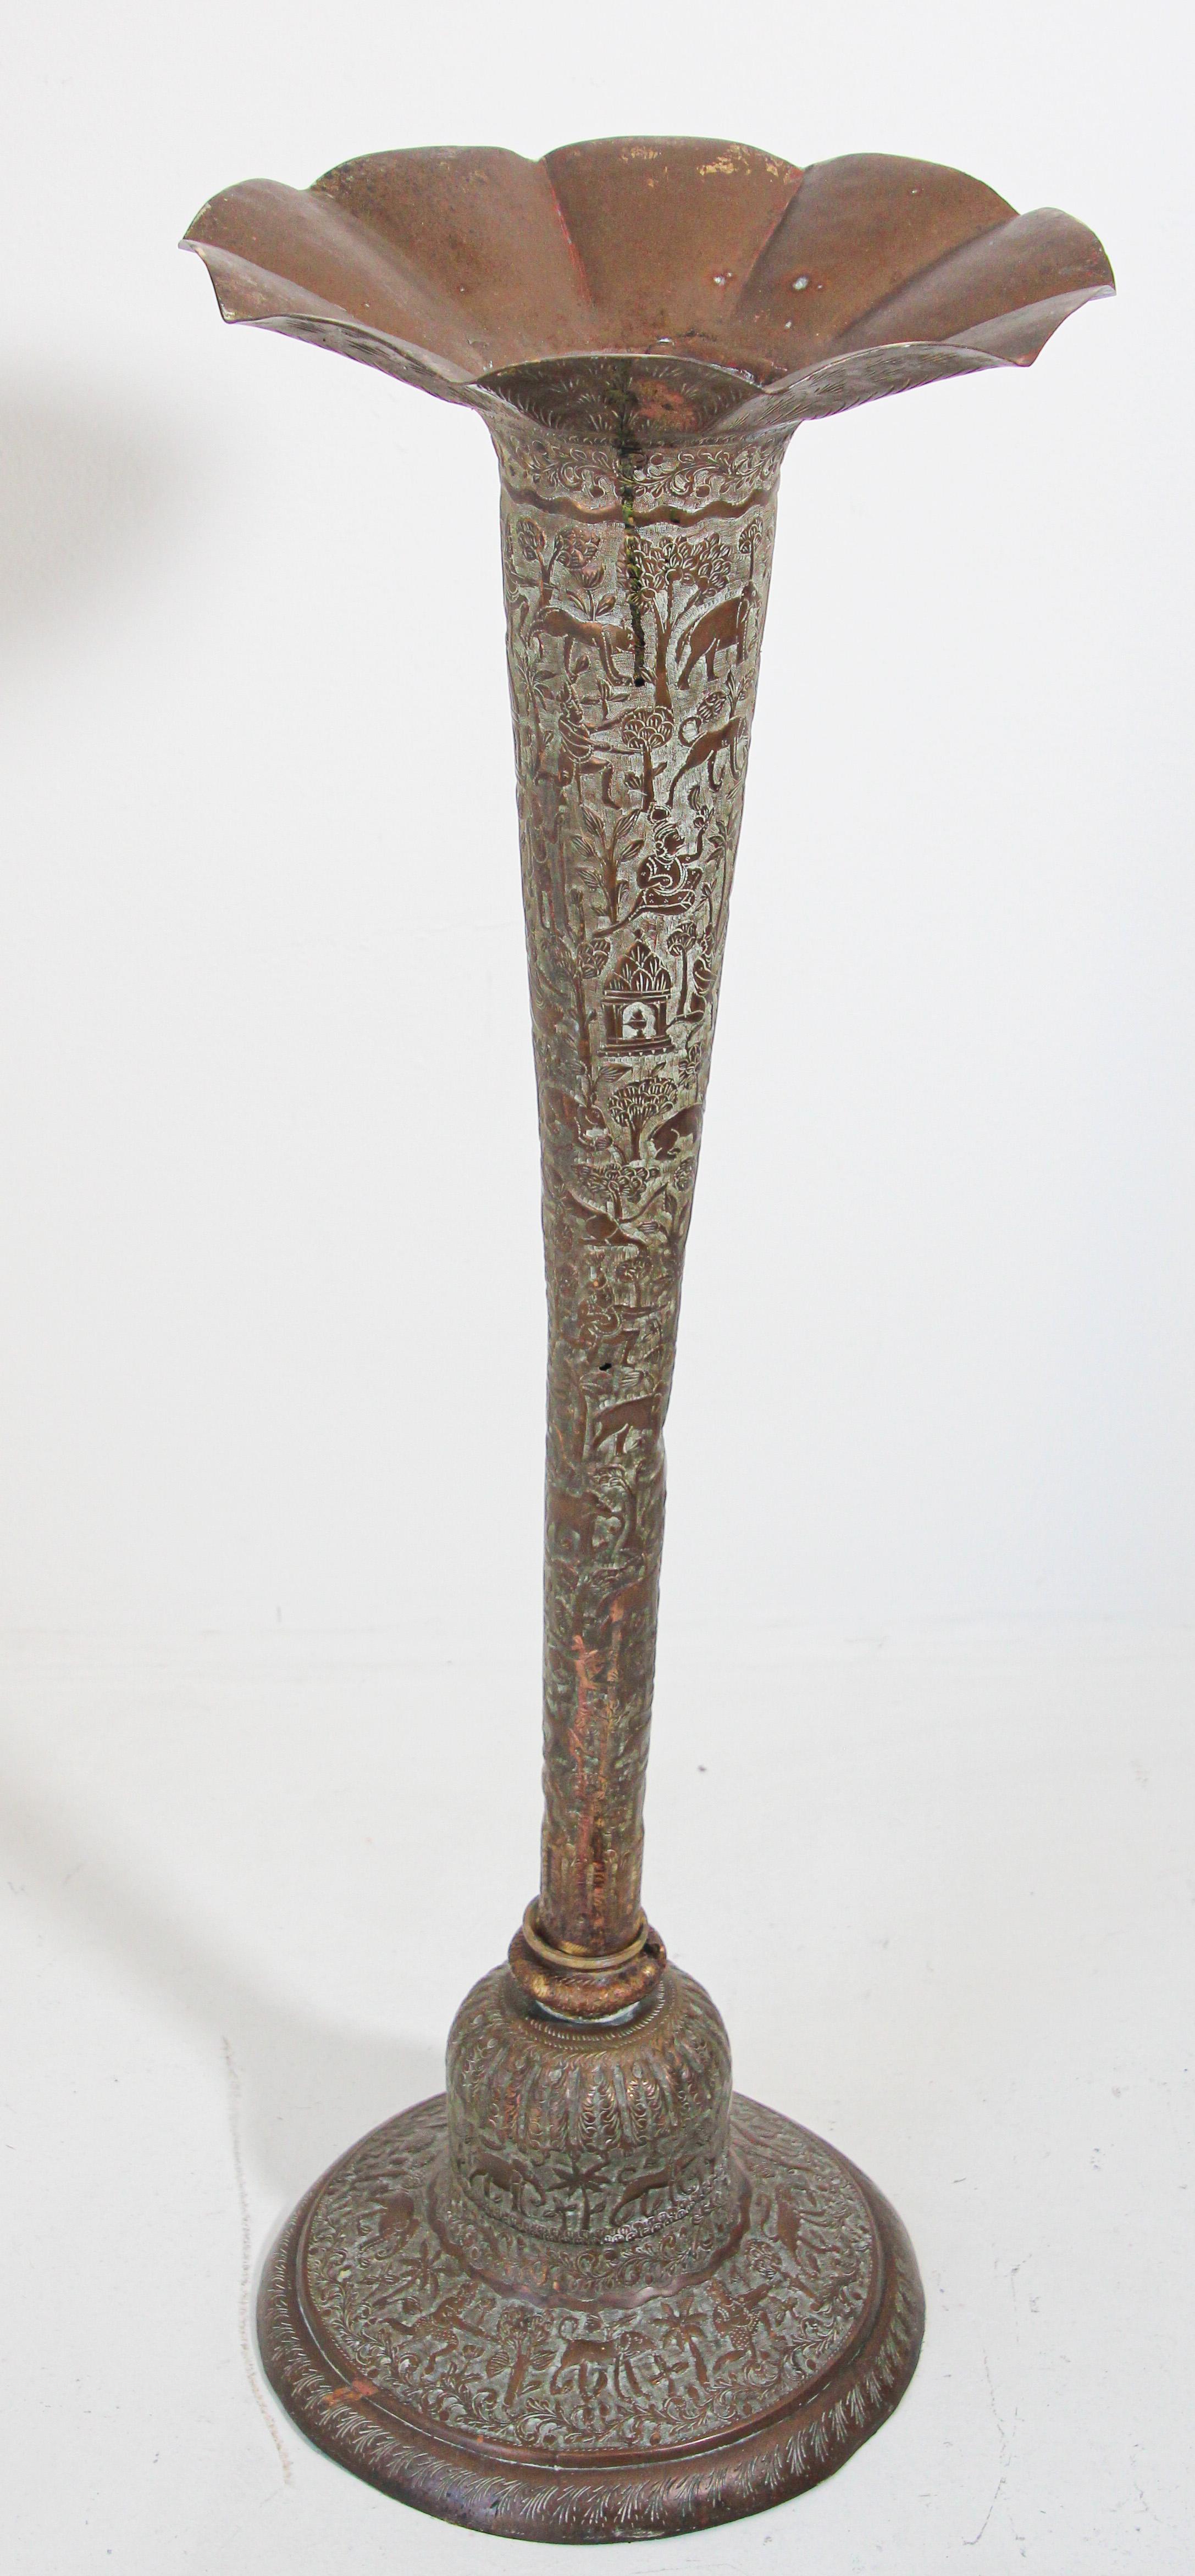 Antique 19th century floor bronzed copper large vase.
Tall brass Indo Persian vase in a trumpet shape.
Handcrafted large sculptural elegant bronzed color metal copper vase.
Delicately handmade and etched, hammered and carved with very Fine